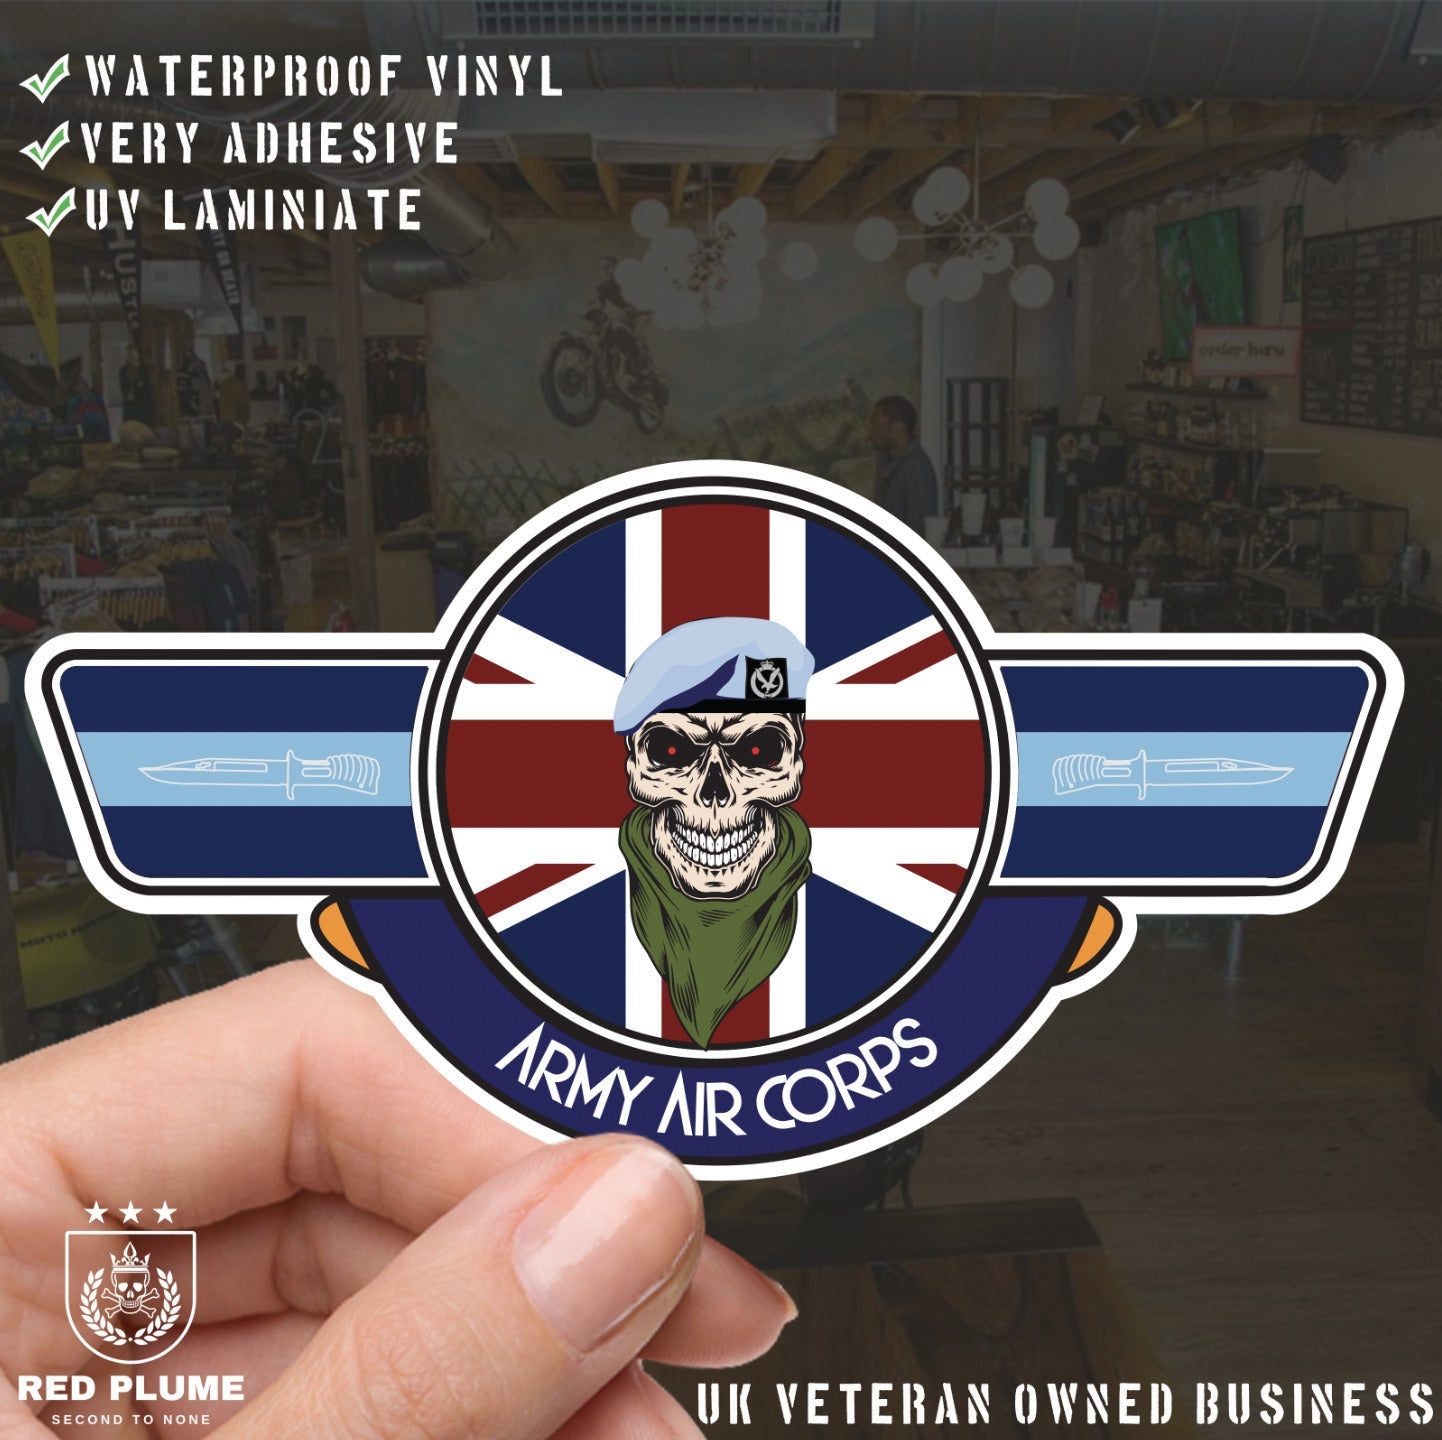 Army Air Corps UV Laminated Vinyl Sticker - Wings redplume